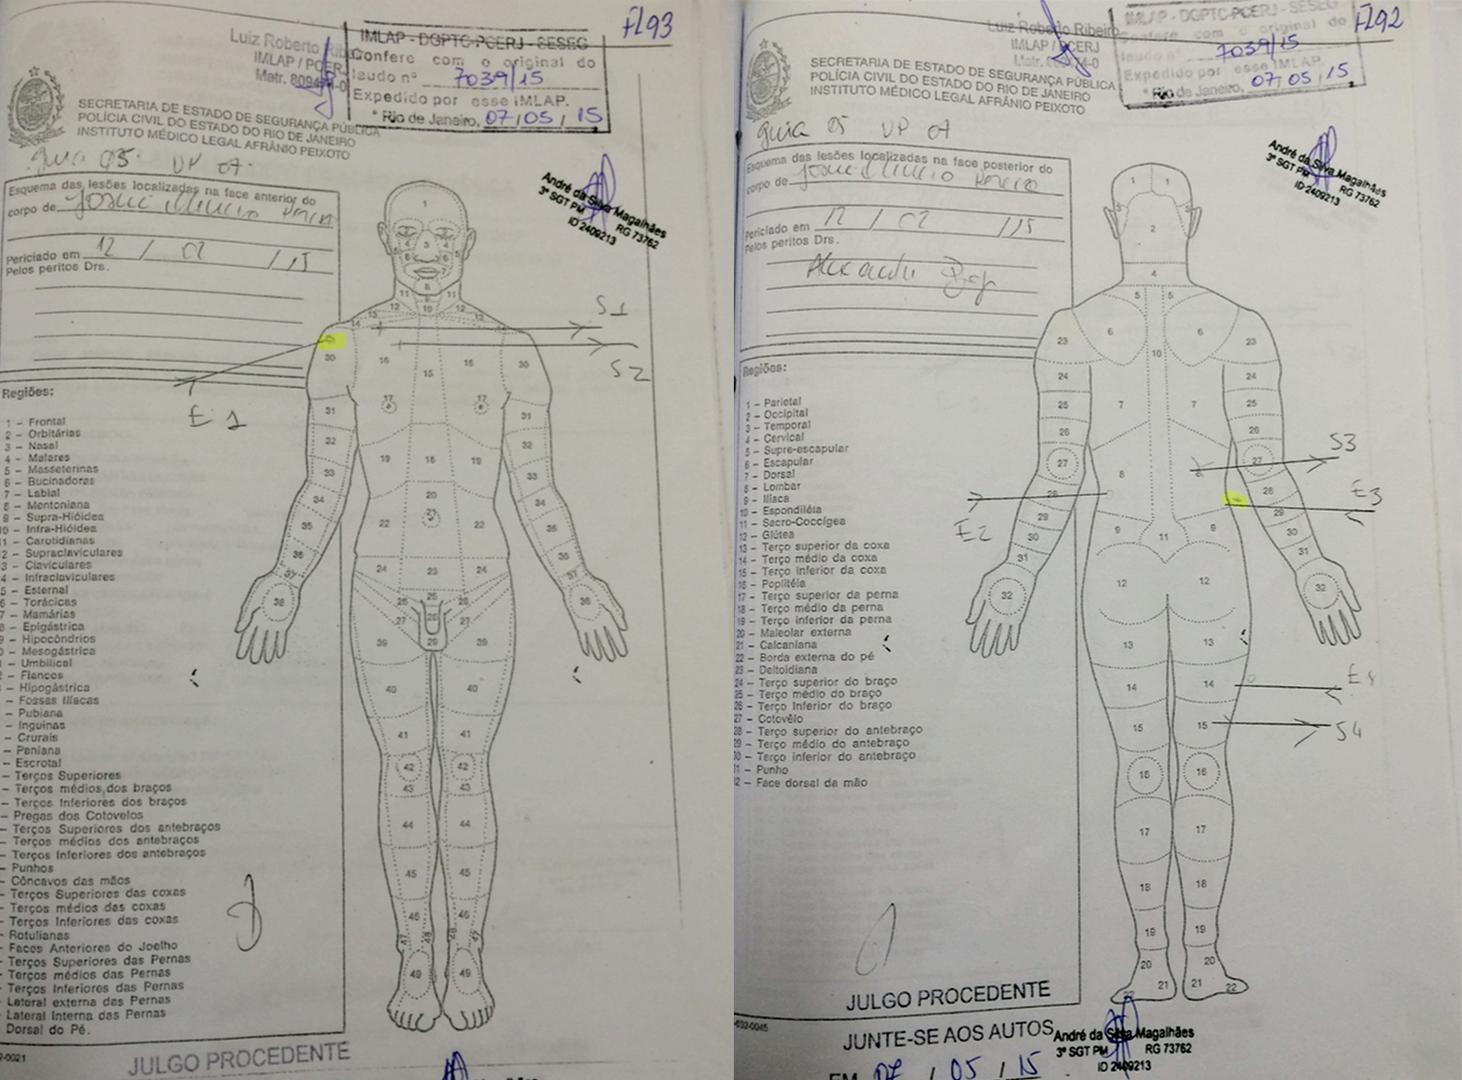 The autopsy diagrams in the case of Josué Oliveira Pereira show he was shot once in the back (marked by entry wound “E2”), once in the back of the leg (“E4”), once on the side (“E3”), and once in the shoulder from the front (“E1”). E1 and E3 had abrasion 